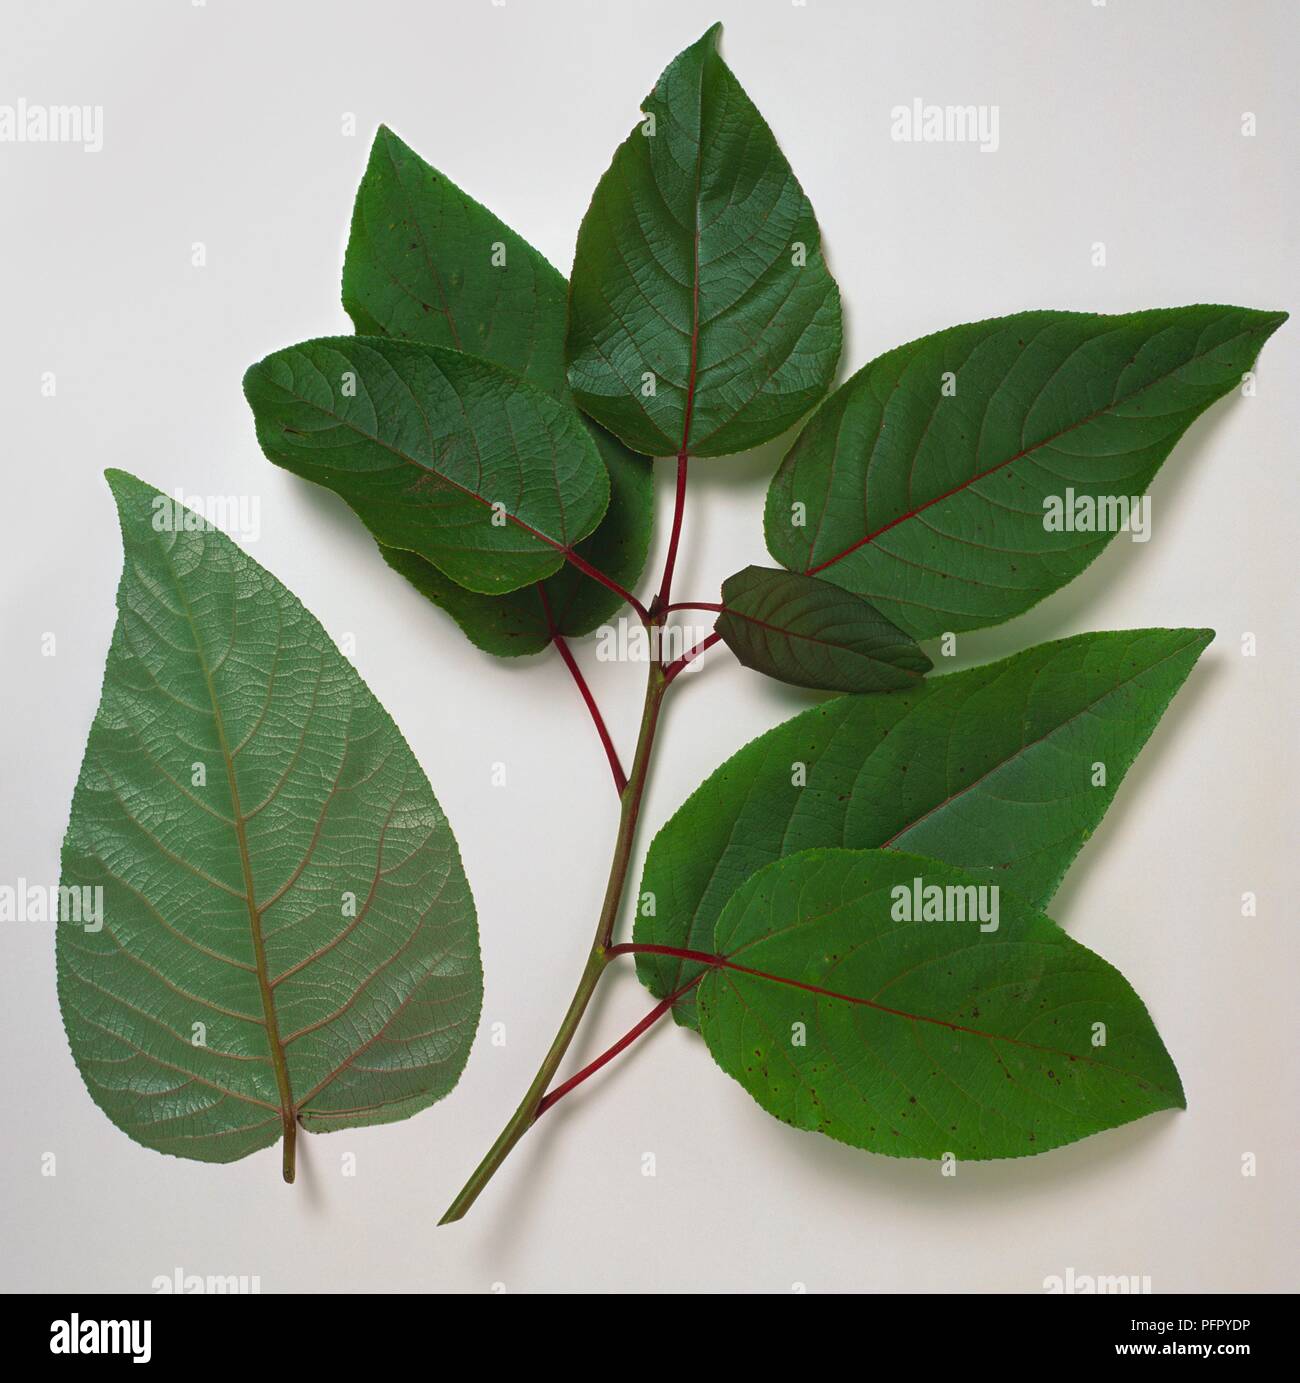 Sprig of leaves from Populus szechuanica, and a single leaf (underside) from Populus szechuanica var thibetica (Sichuan poplar) Stock Photo